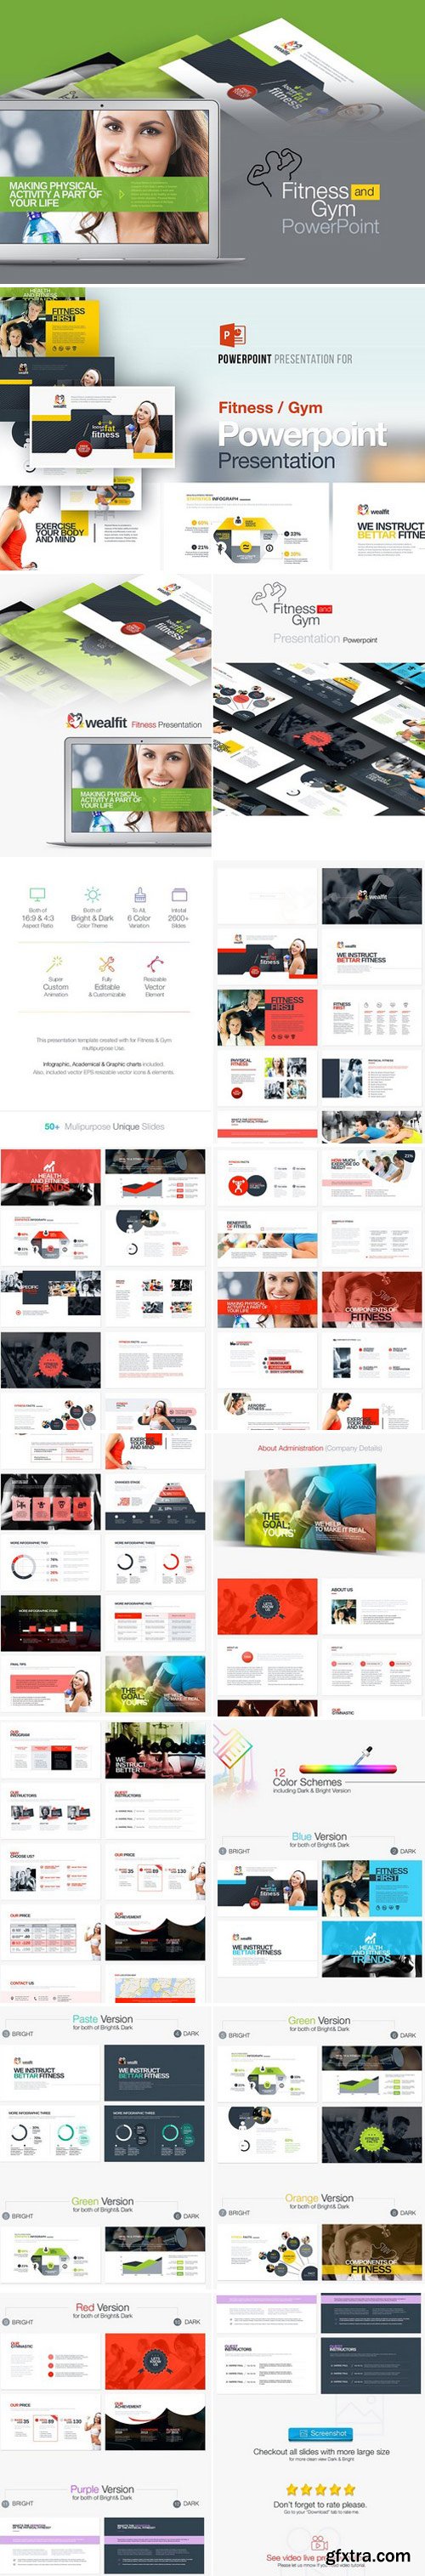 CM - Fitness & Gym Powerpoint Template 2378465